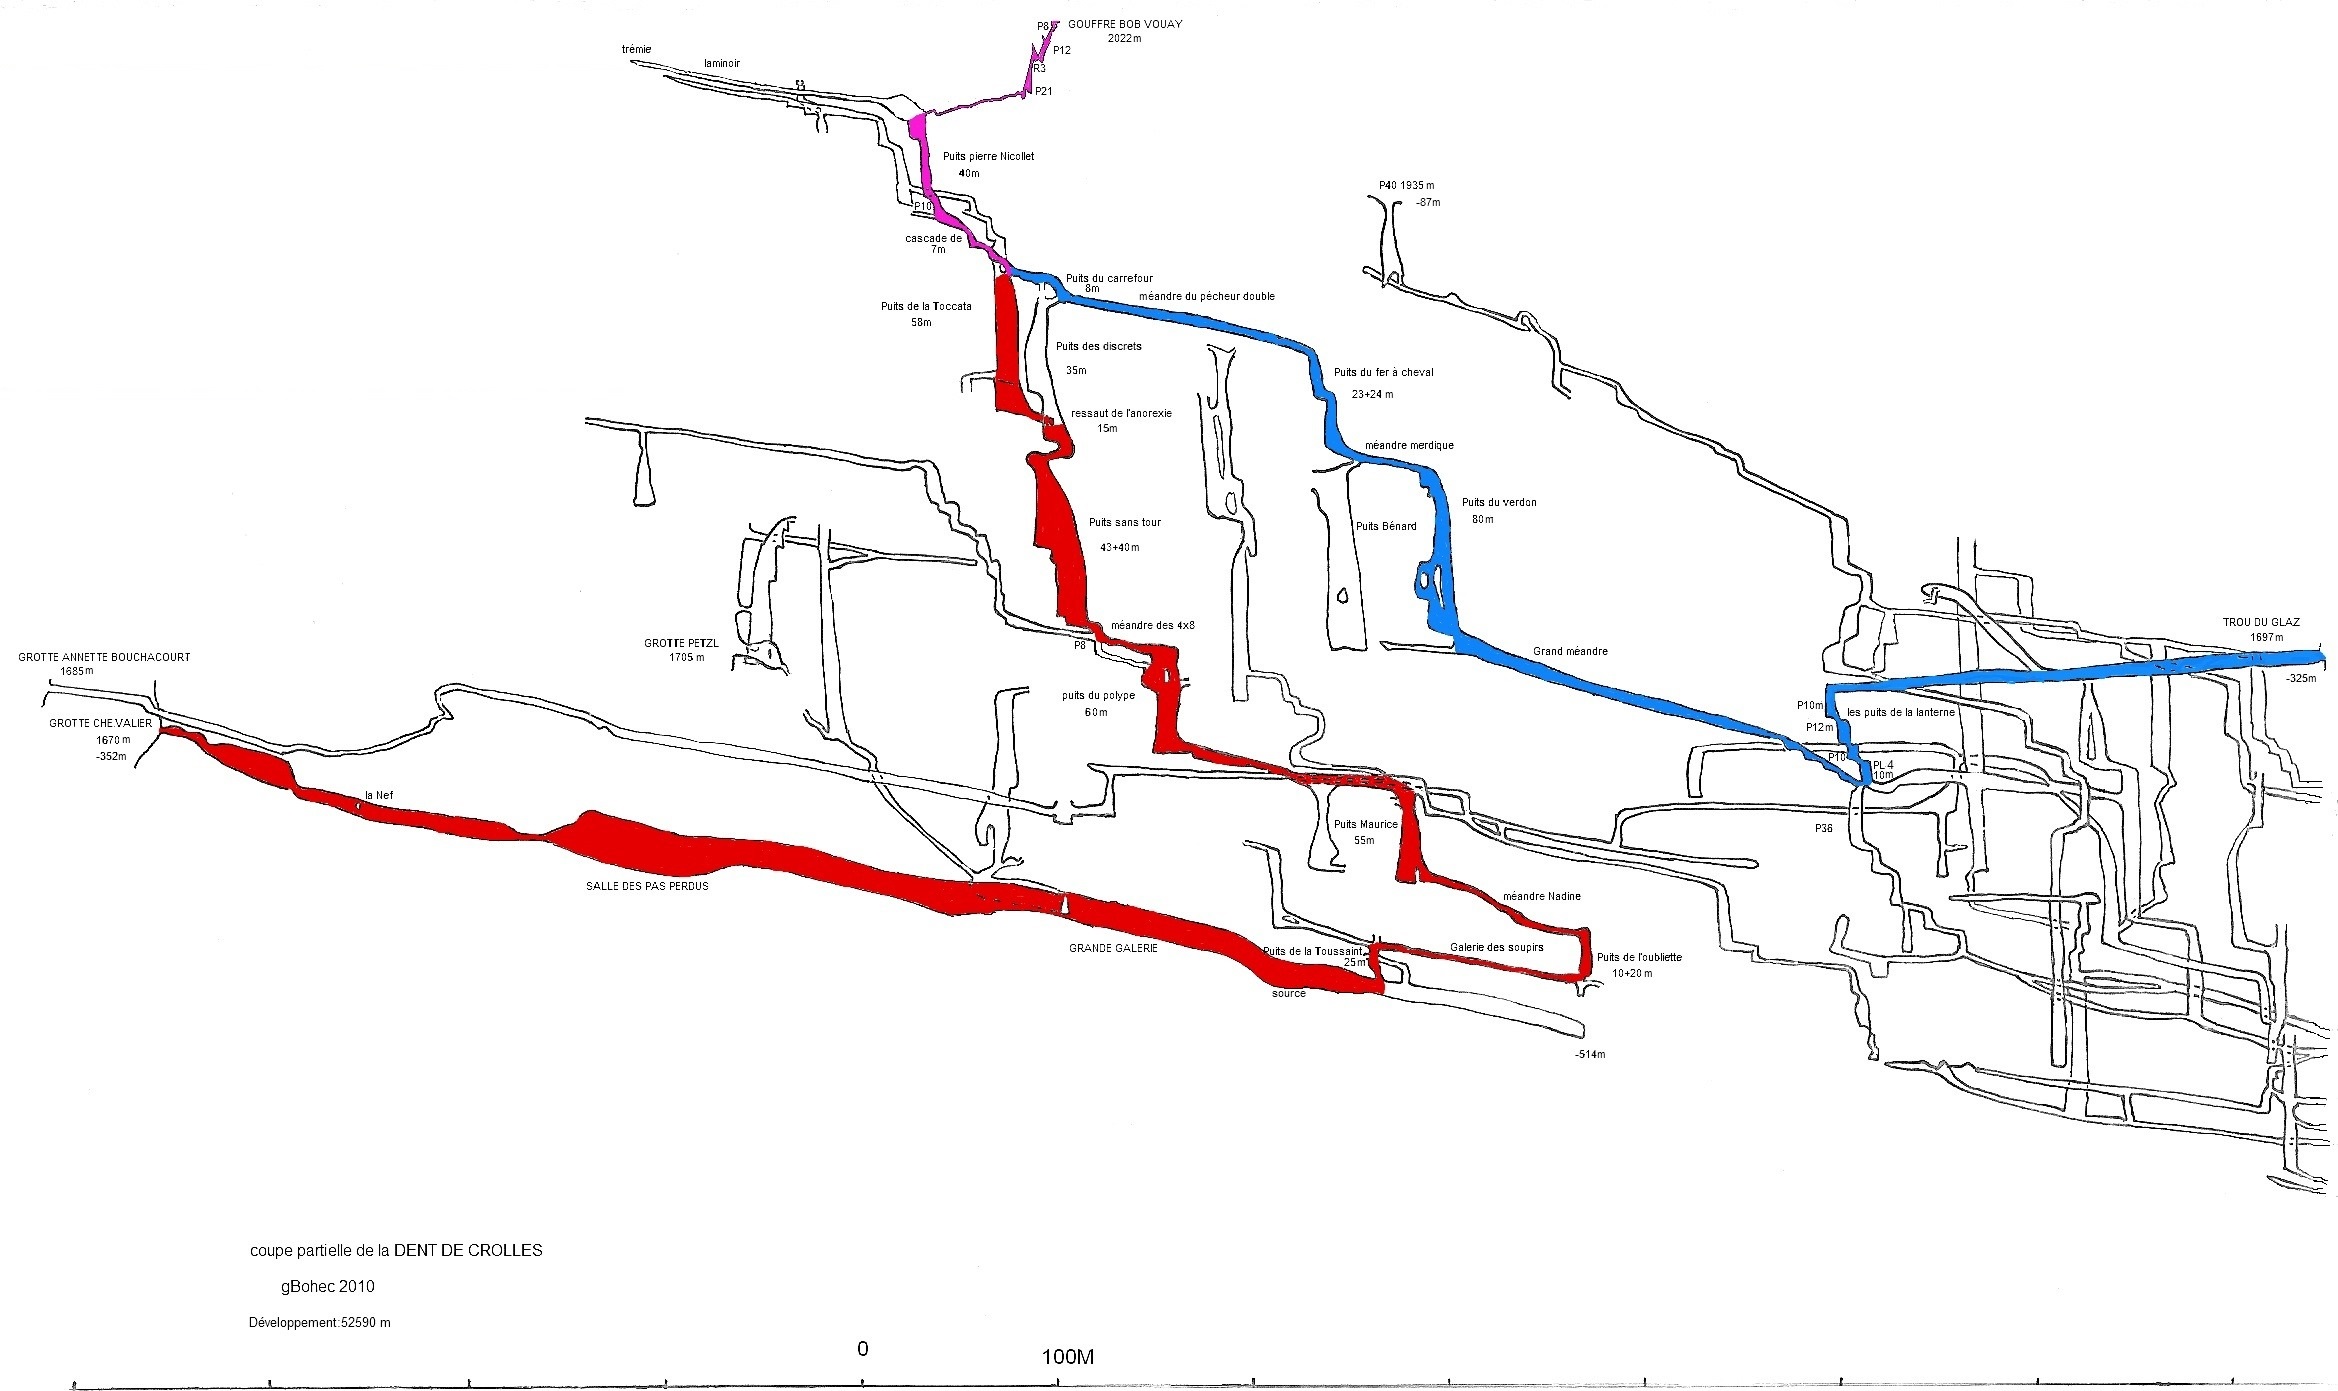 Cross-section of the passages below Gouffre Bob Vouay, drawn by Gilbert Bohec.
Red shows the Vouay - Chevalier route; blue the Vouay - Glaz route.
Download to see highest resolution available